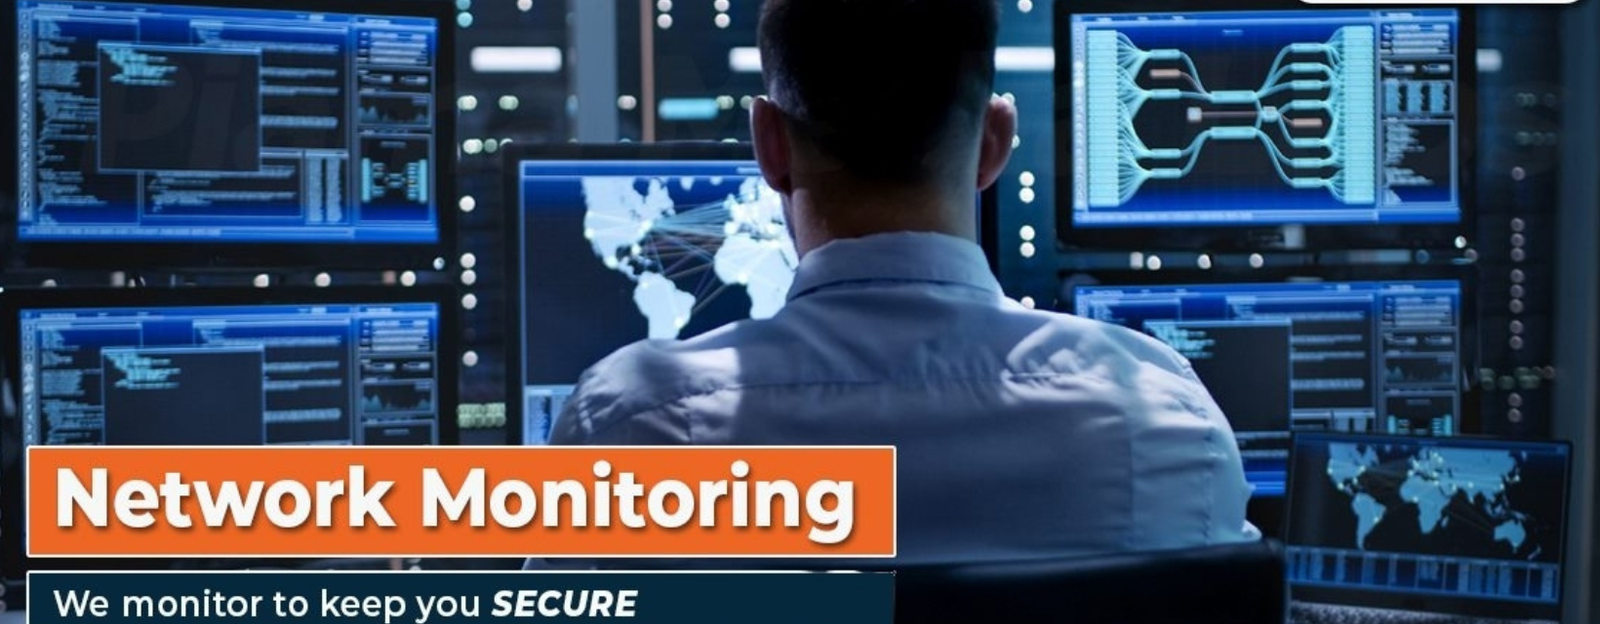 How Does Network Monitoring Work